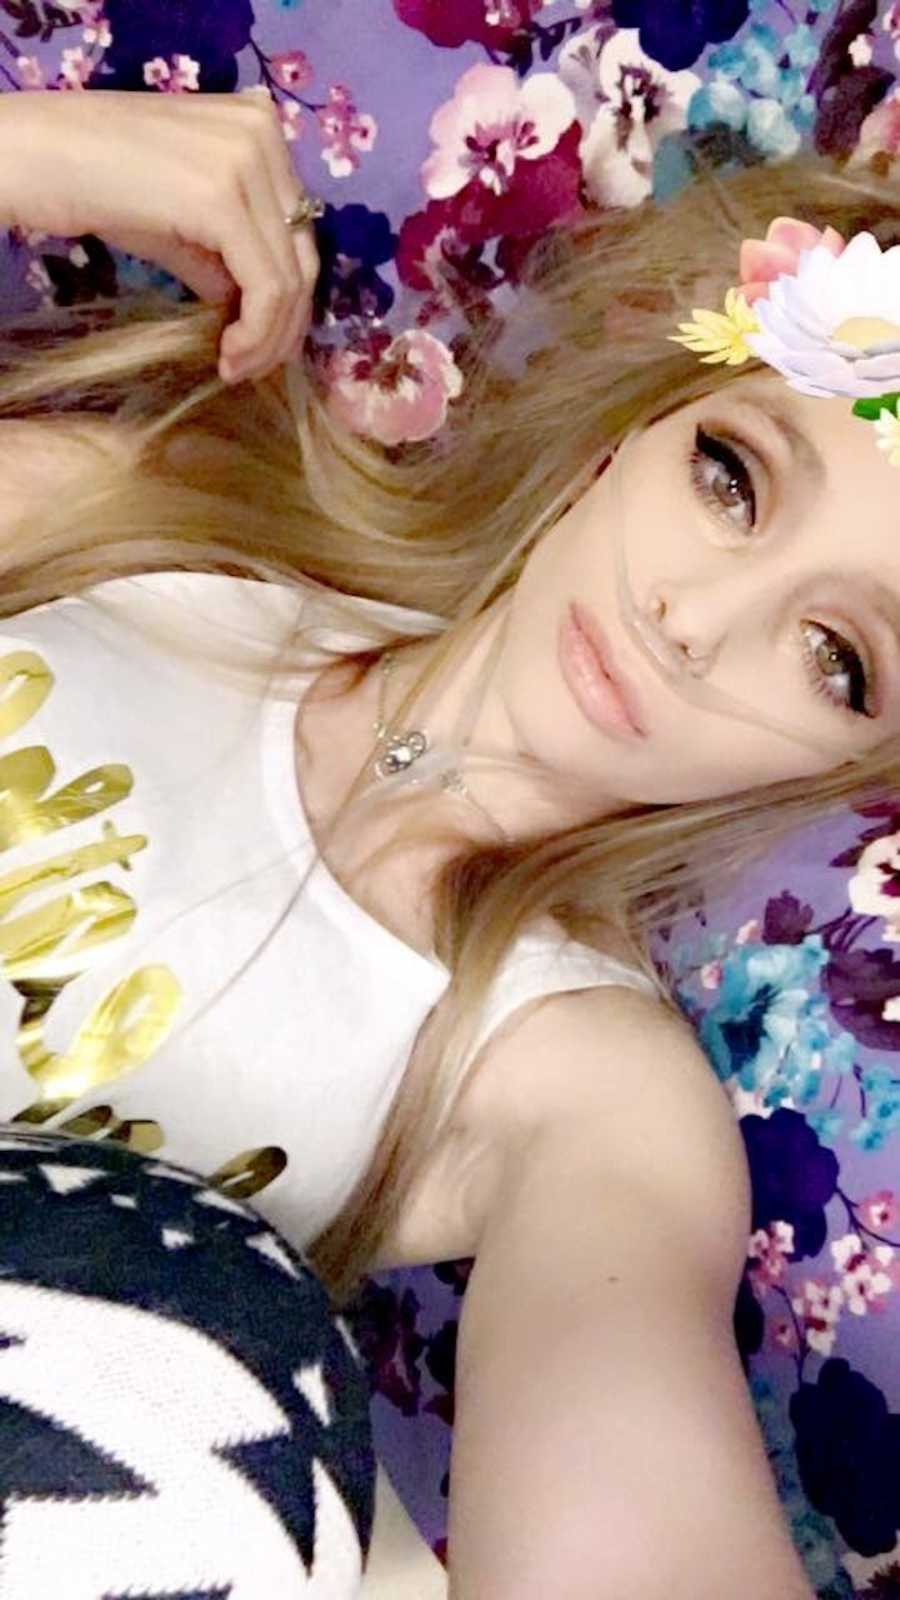 Woman with cystic fibrosis takes selfie with flower crown filter